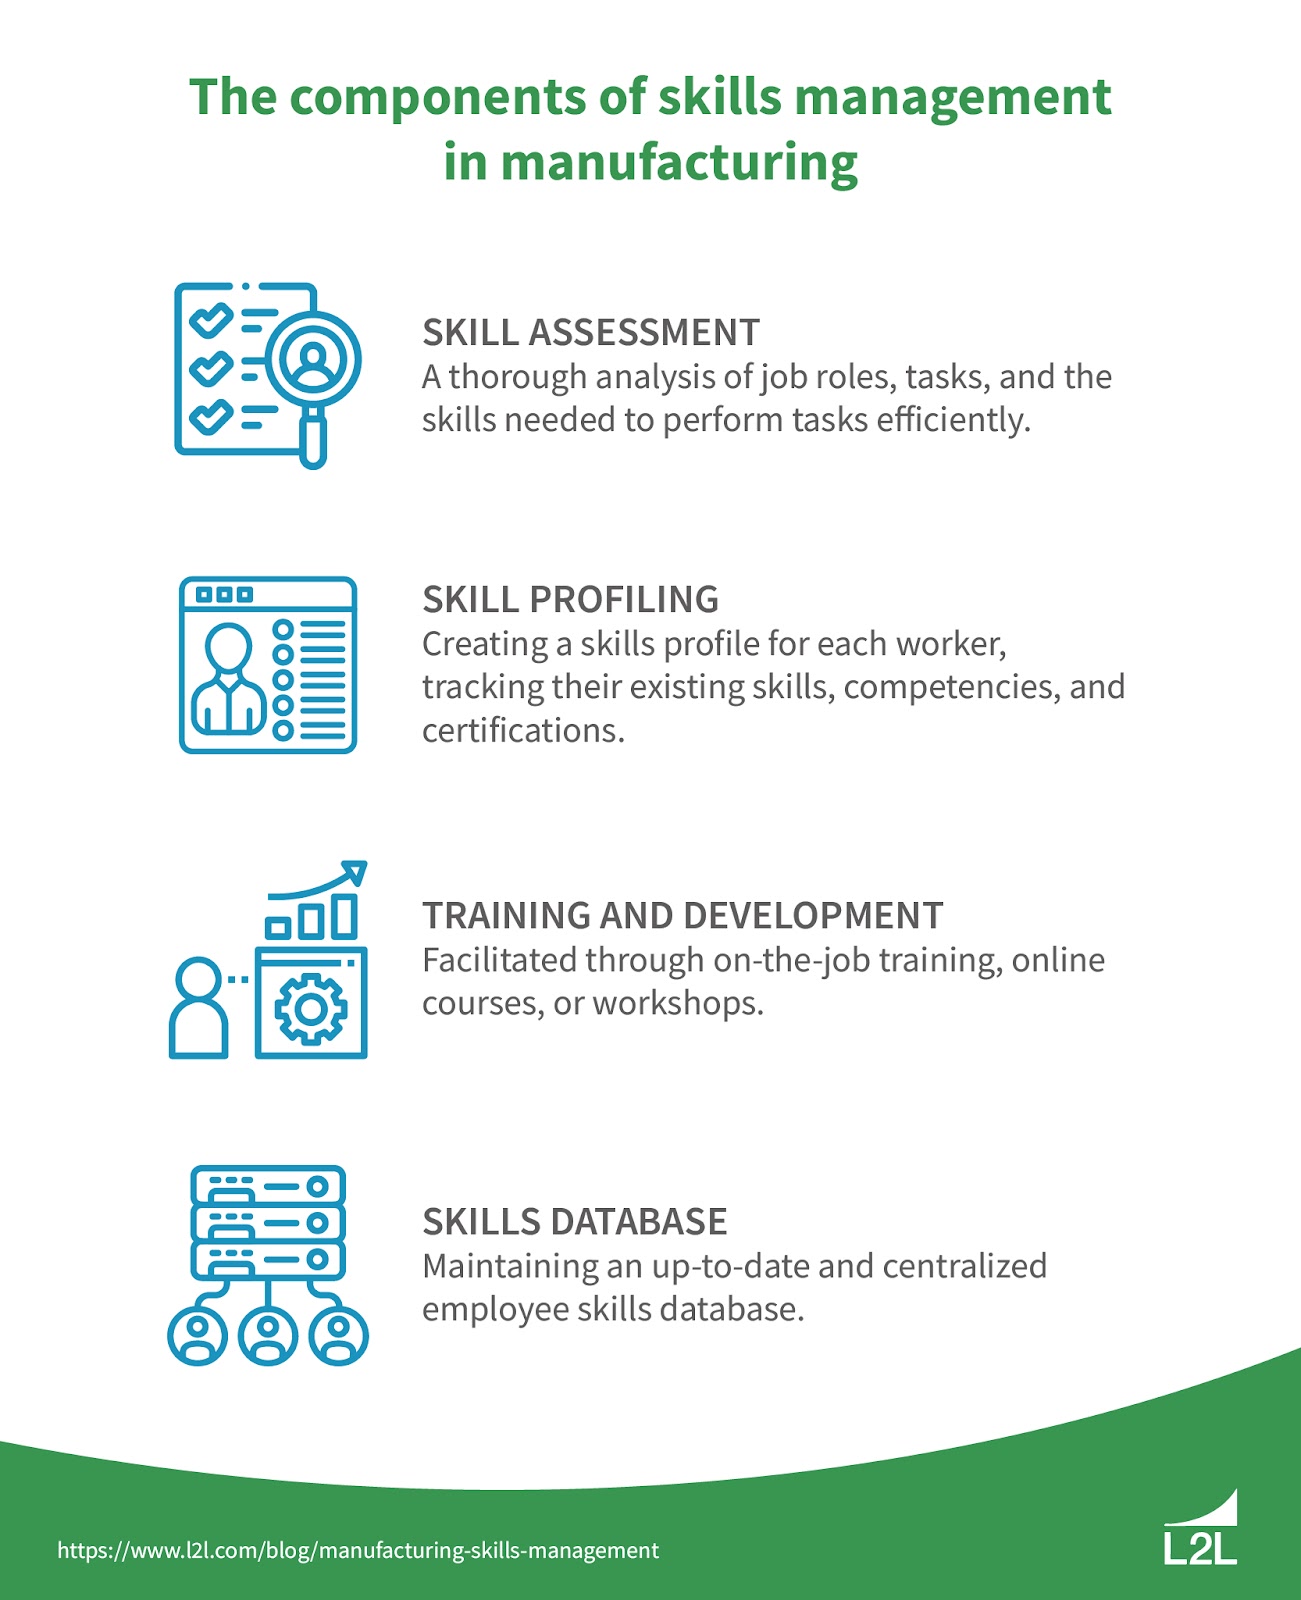 The components of skills management in manufacturing